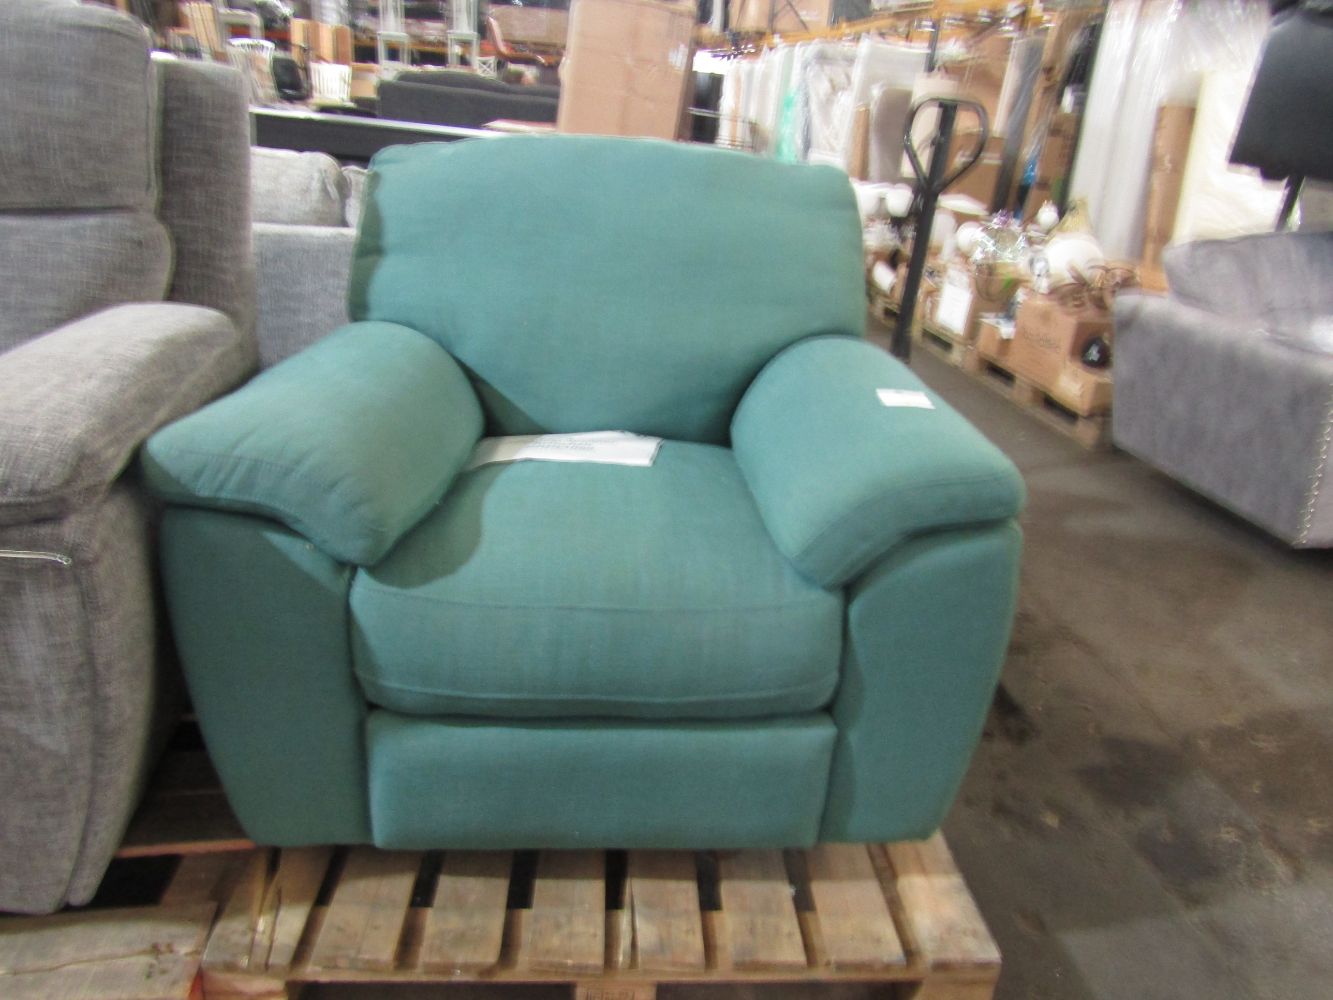 Sofas and Armchairs from SCS, Oak furniture land, John Lewis and more